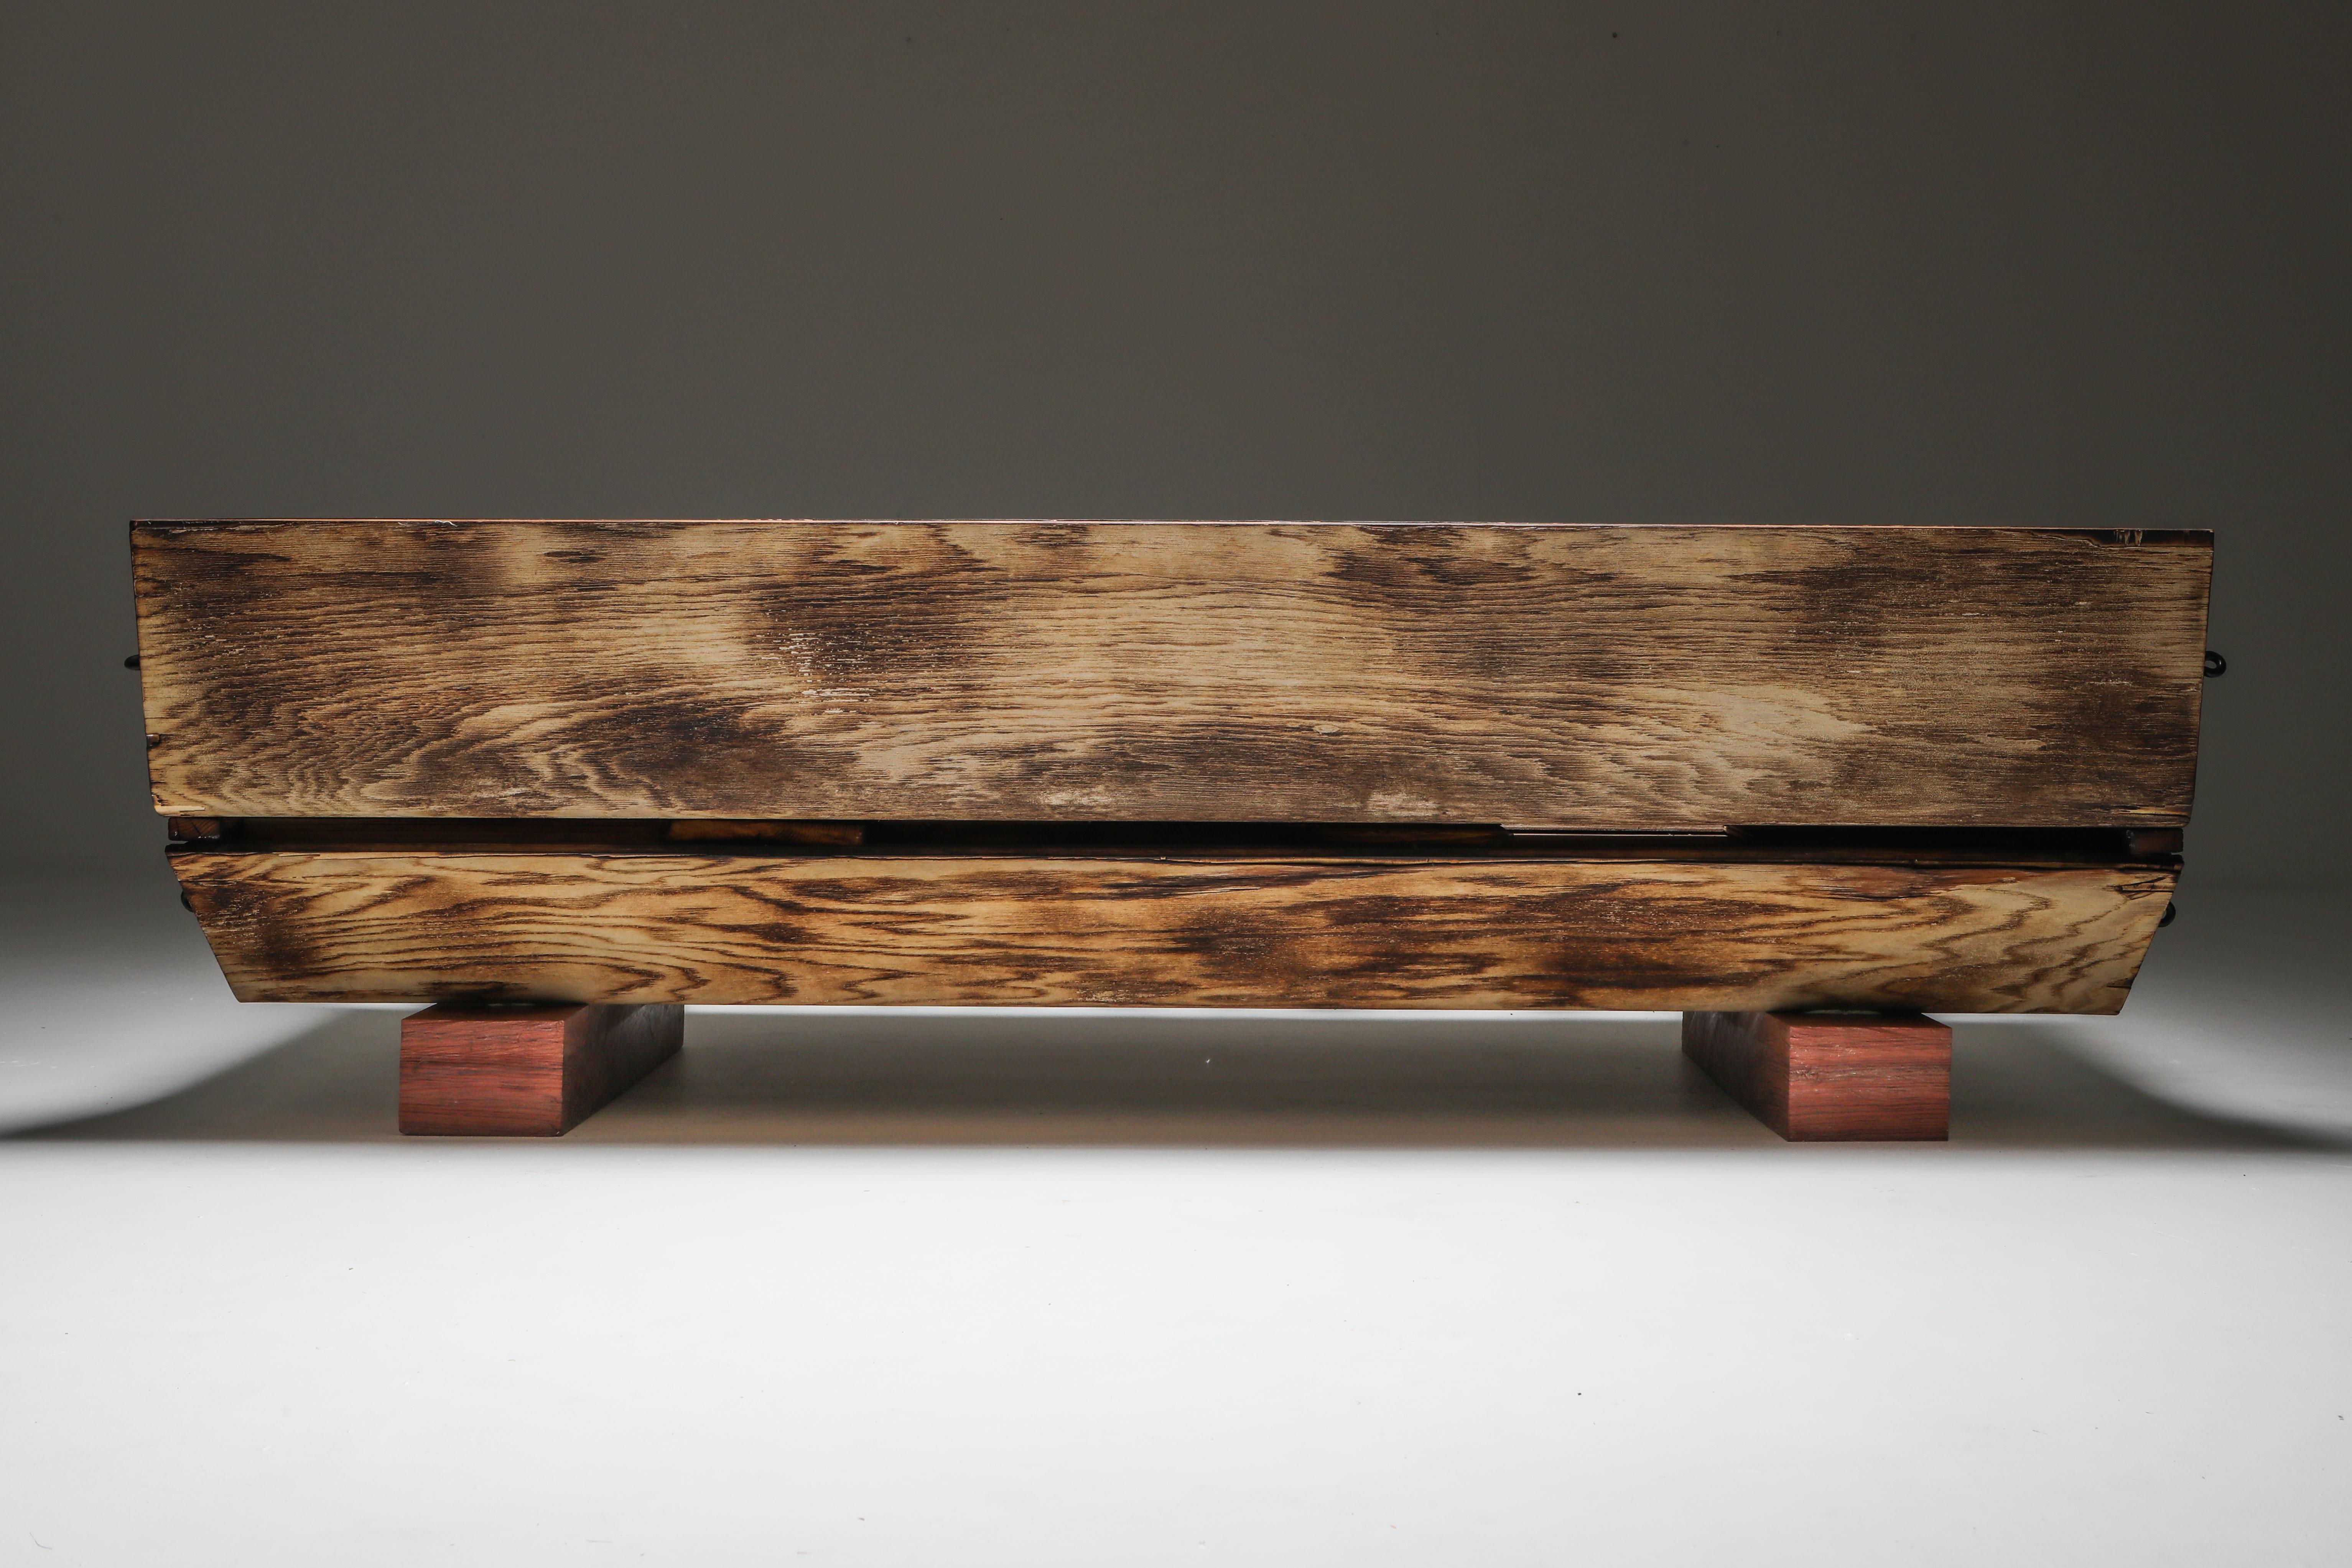 'I Studebaker' Assemblage Bench with Wooden and Leather Elements, Lionel Jadot For Sale 3